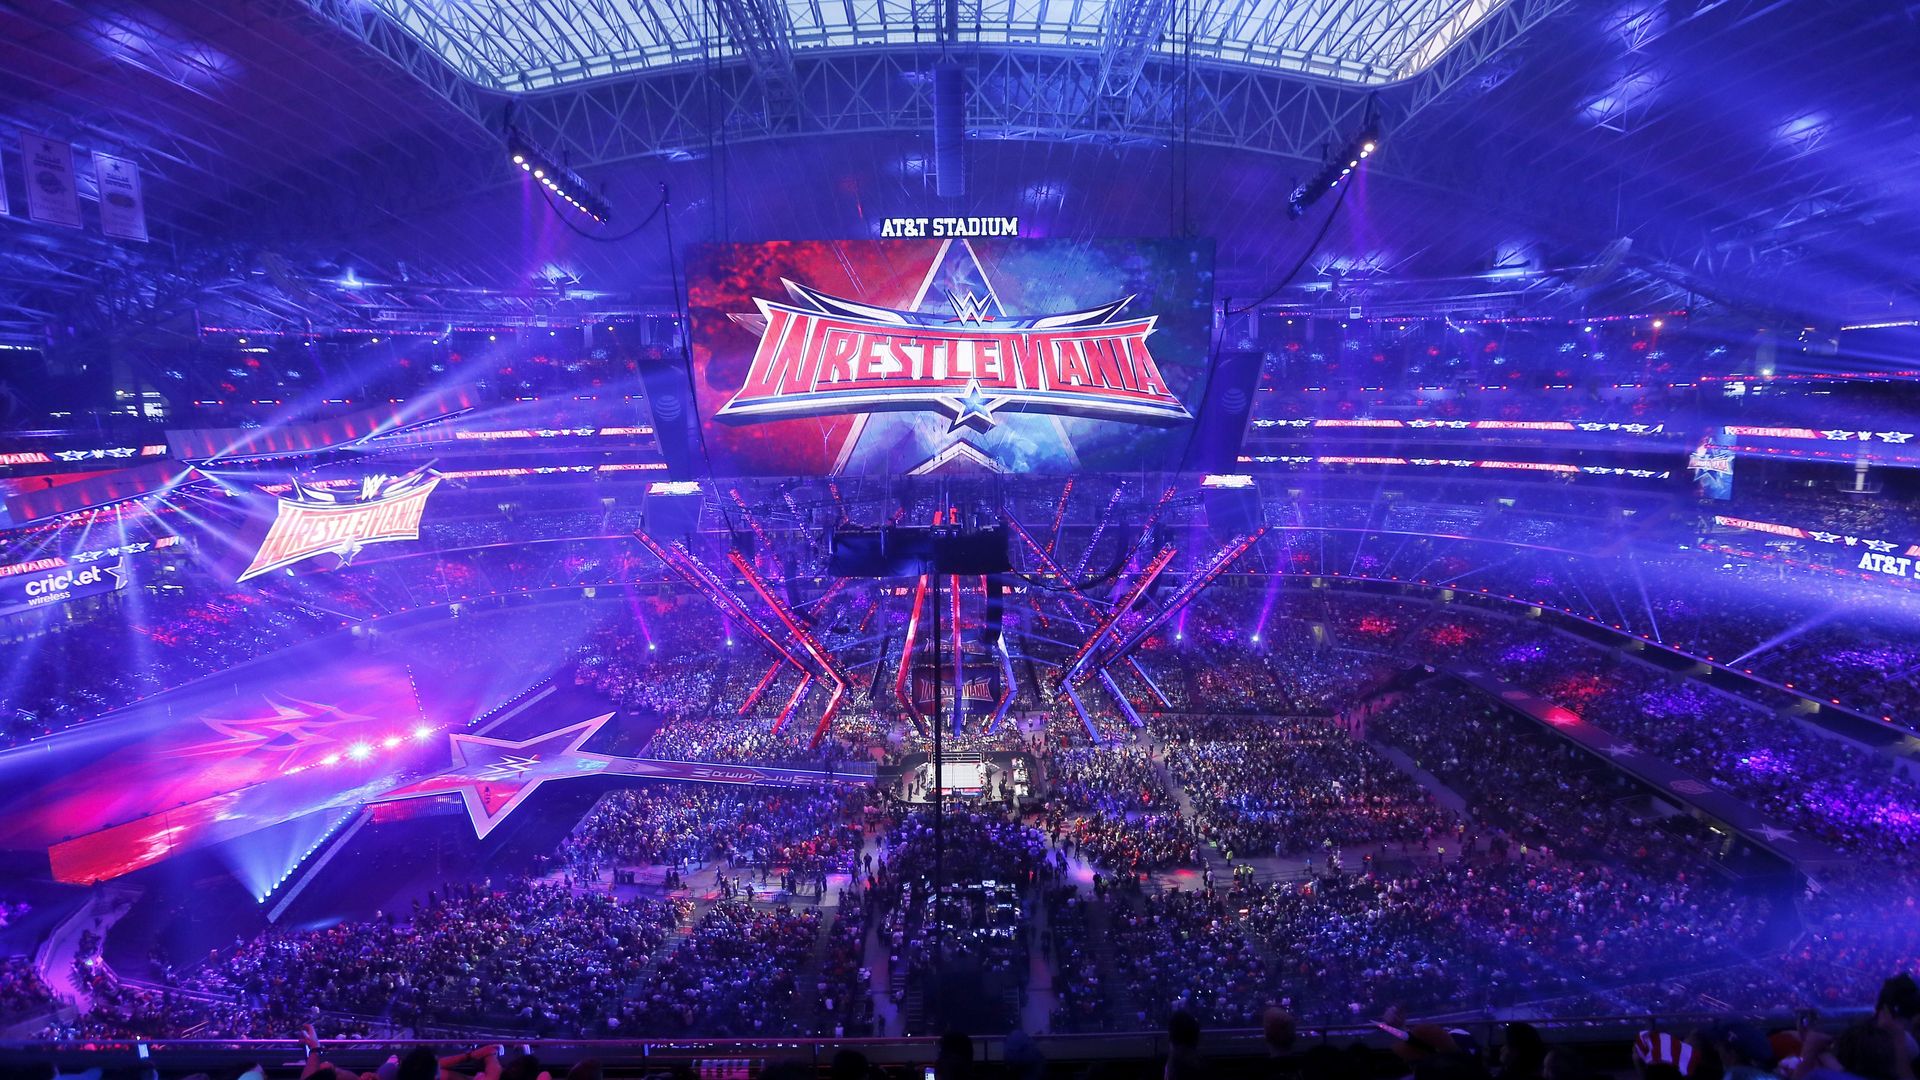 A stadium filled for Wrestlemania.